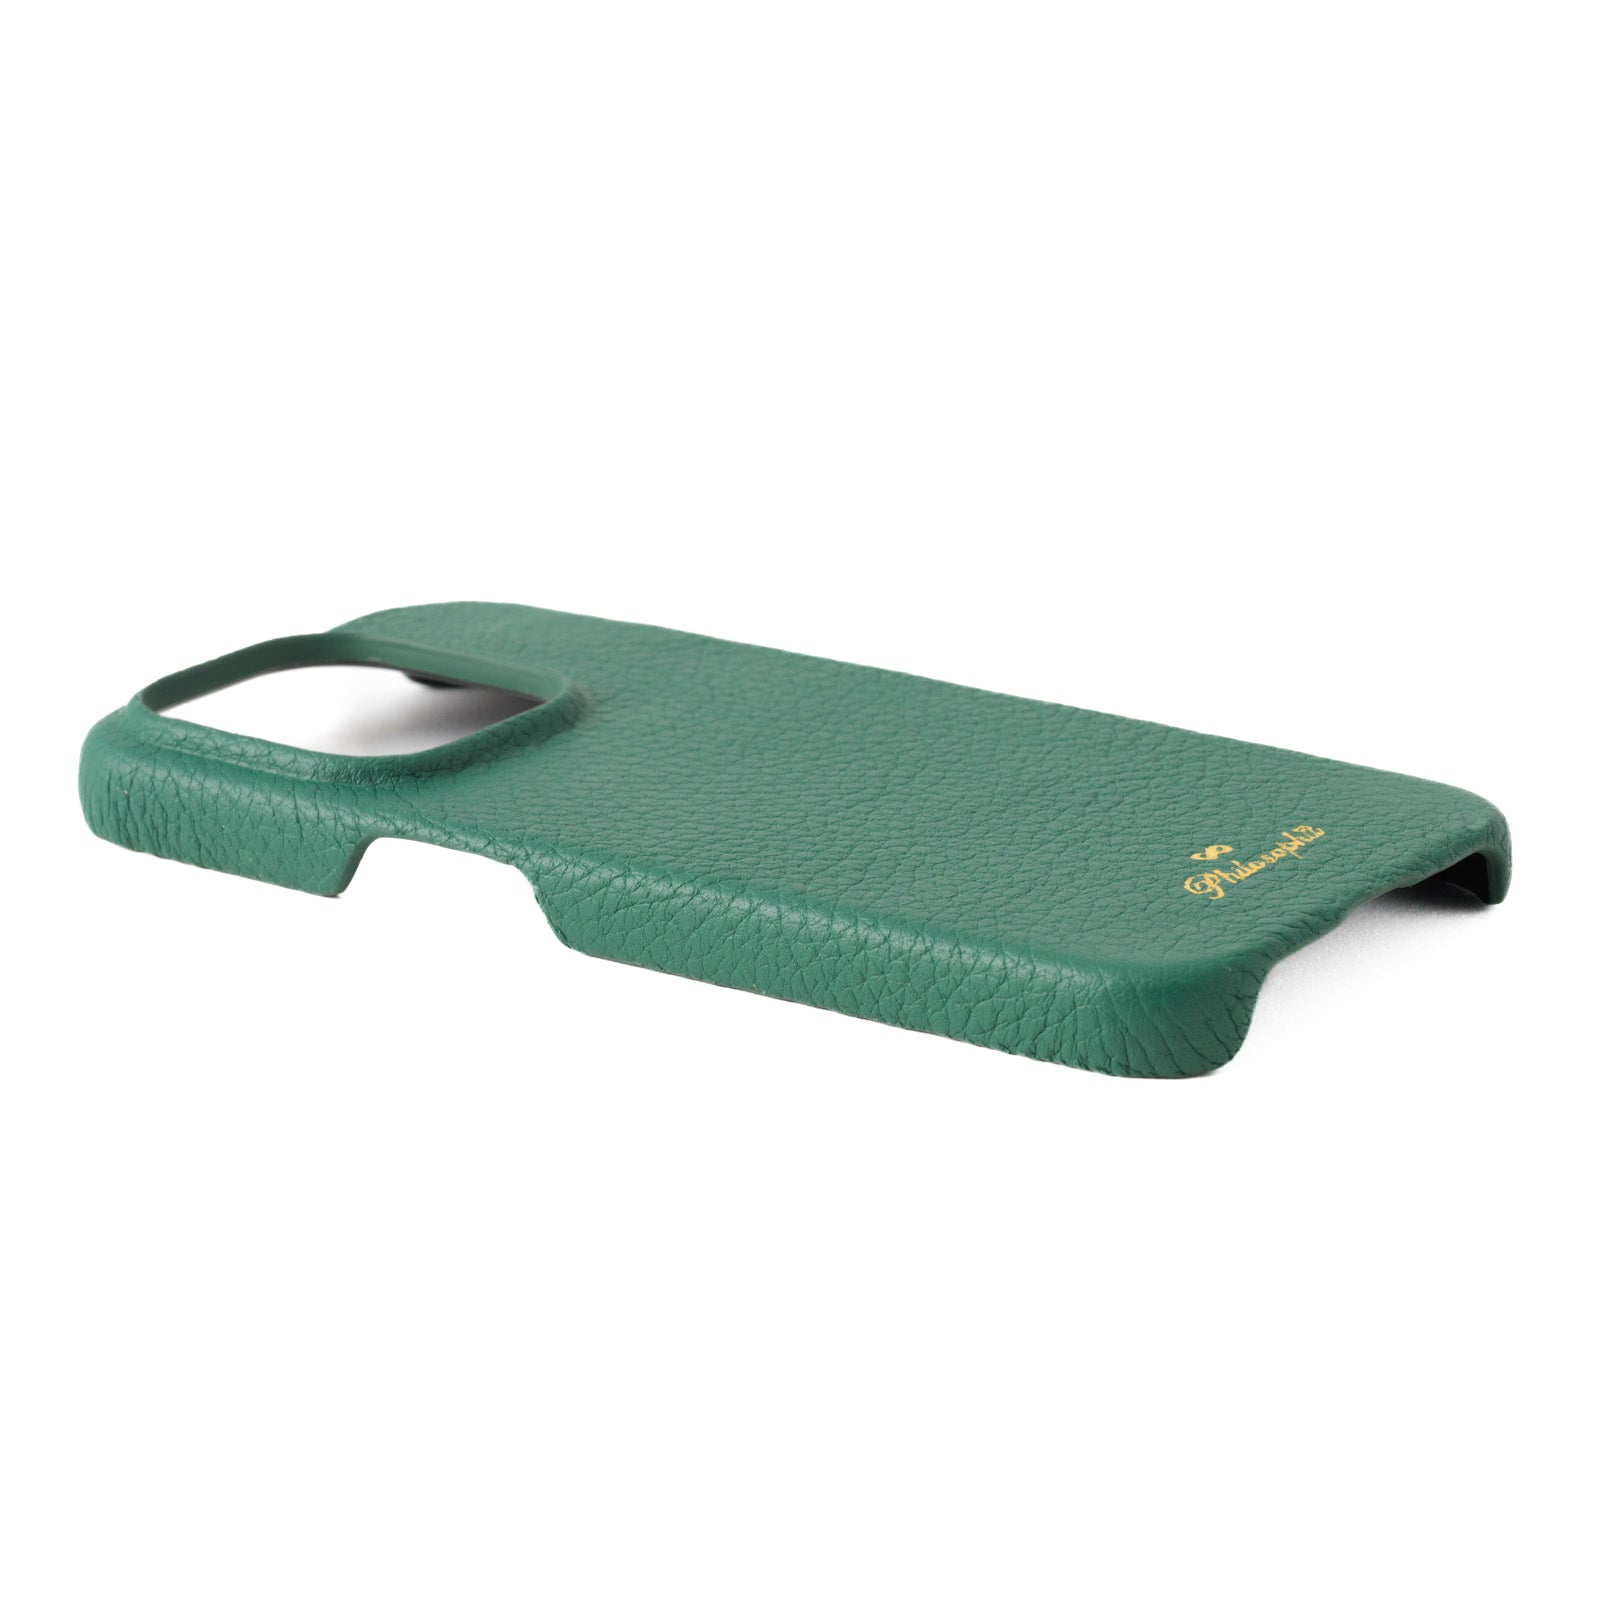 [6th Anniversary Sale] iPhone Back Cover (iPhone 15 Pro/Emerald) Taurillon Clemence